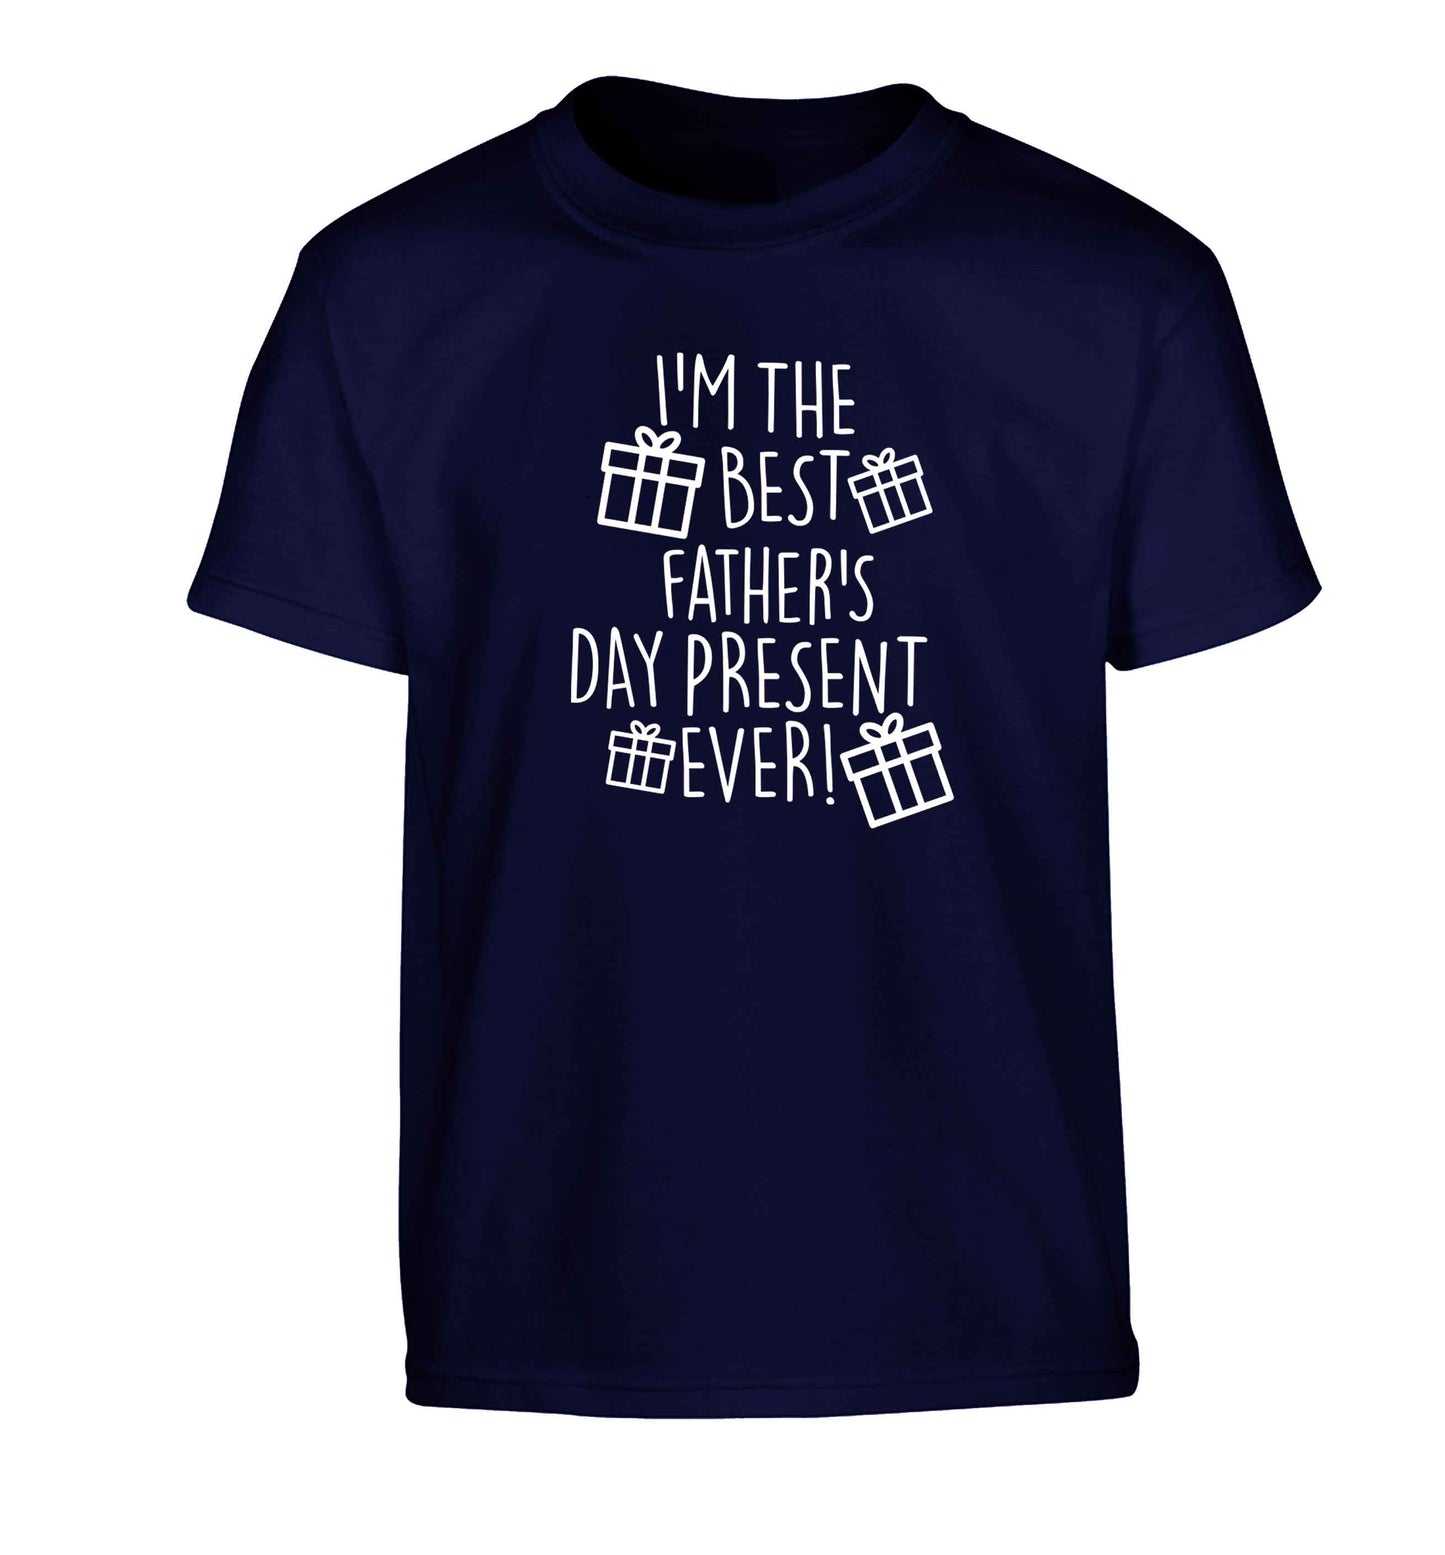 I'm the best father's day present ever!| Children's Tshirt